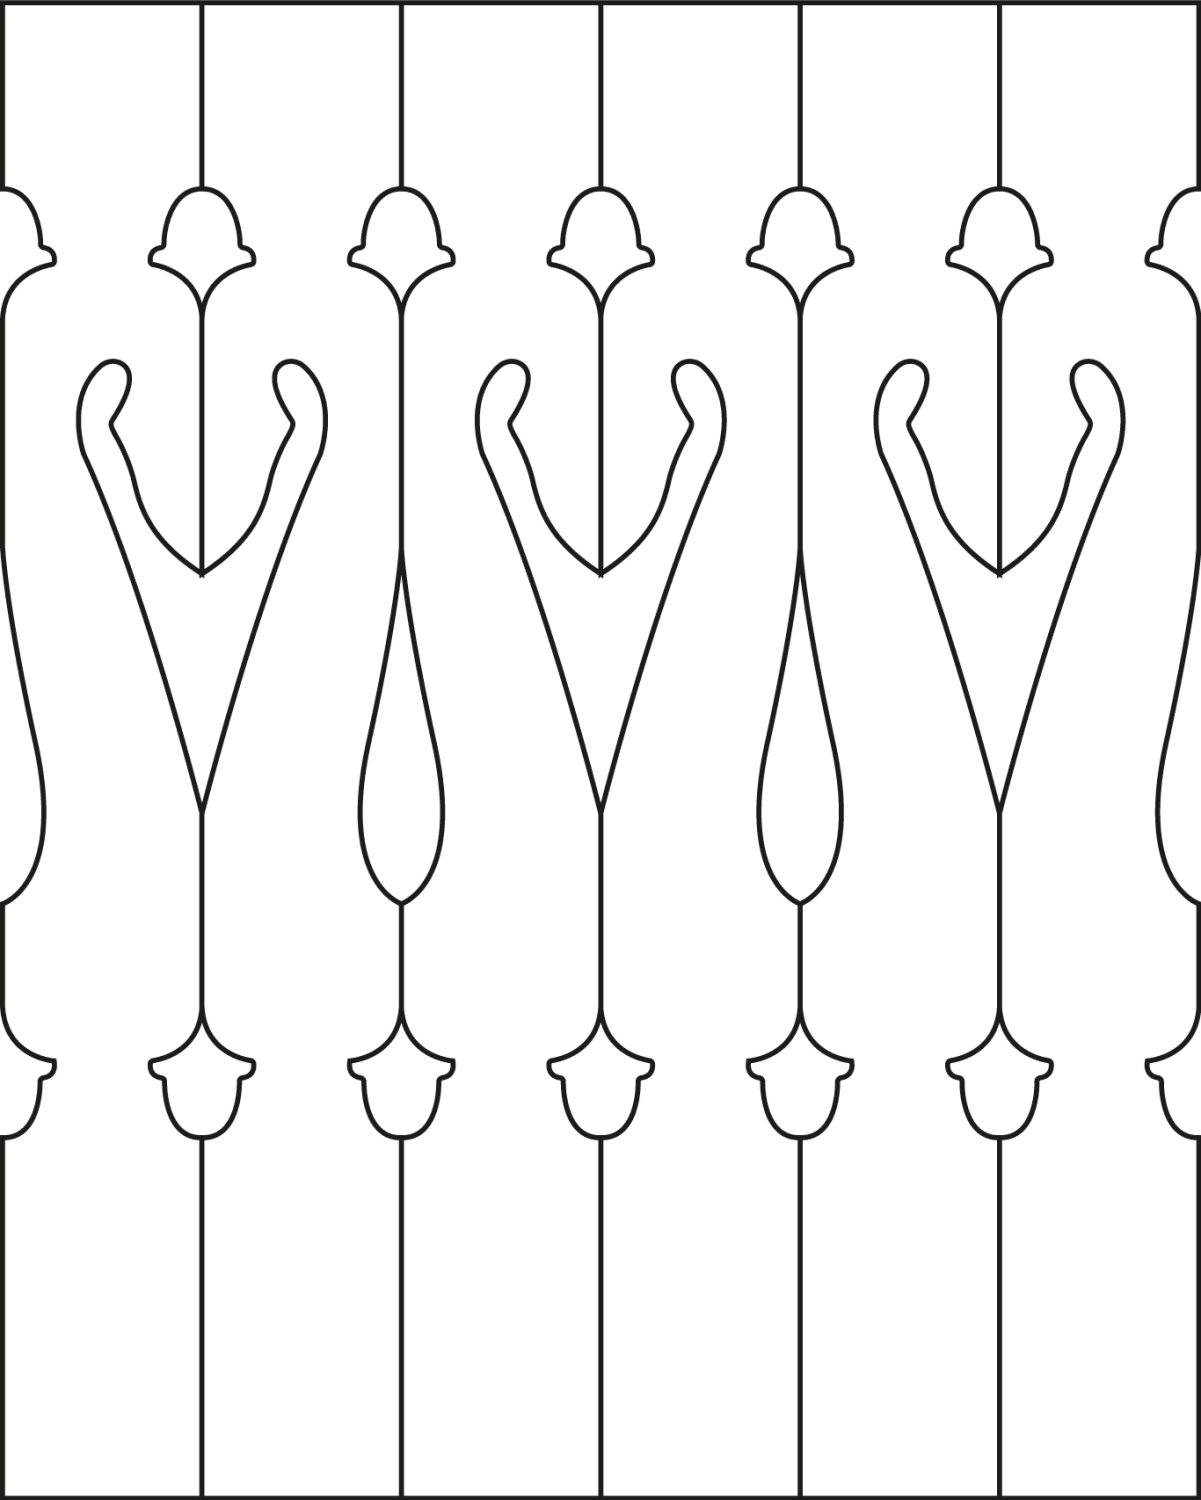 Baluster 006 - The drawing shows 6 Decorative victorian sawn balusters & pickets together